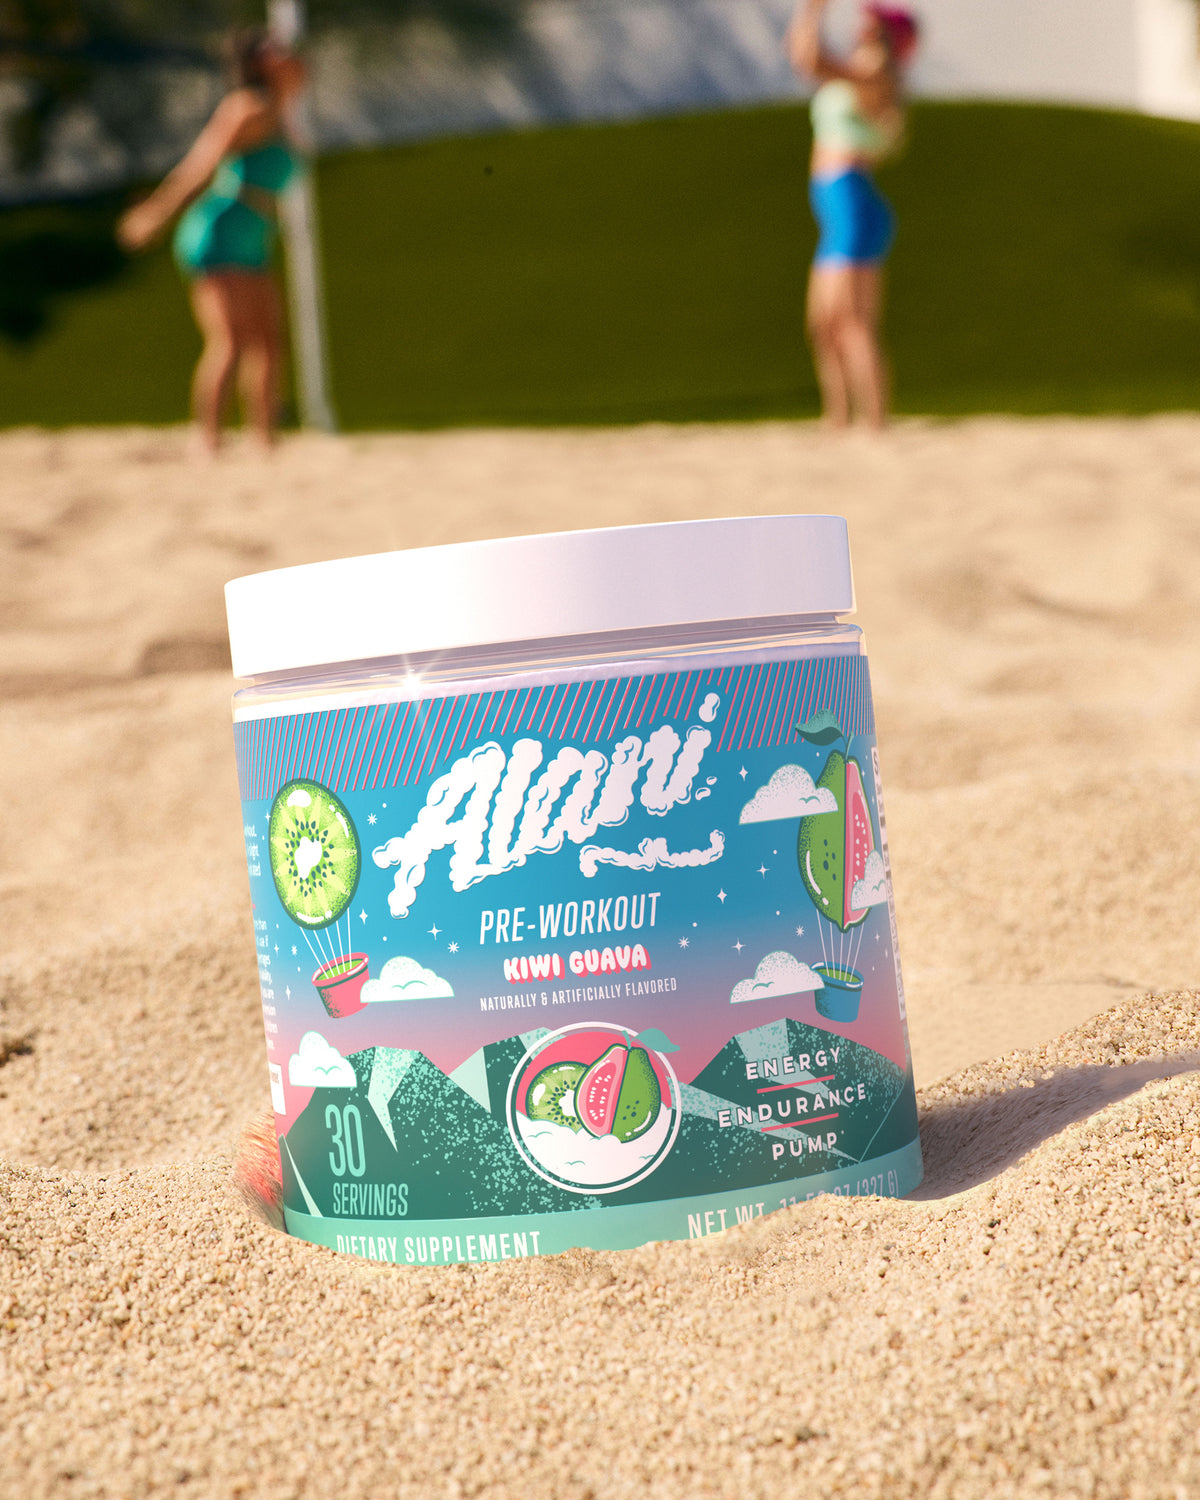 Pre-workout in Kiwi Guava flavor sitting in the sand on a beach.